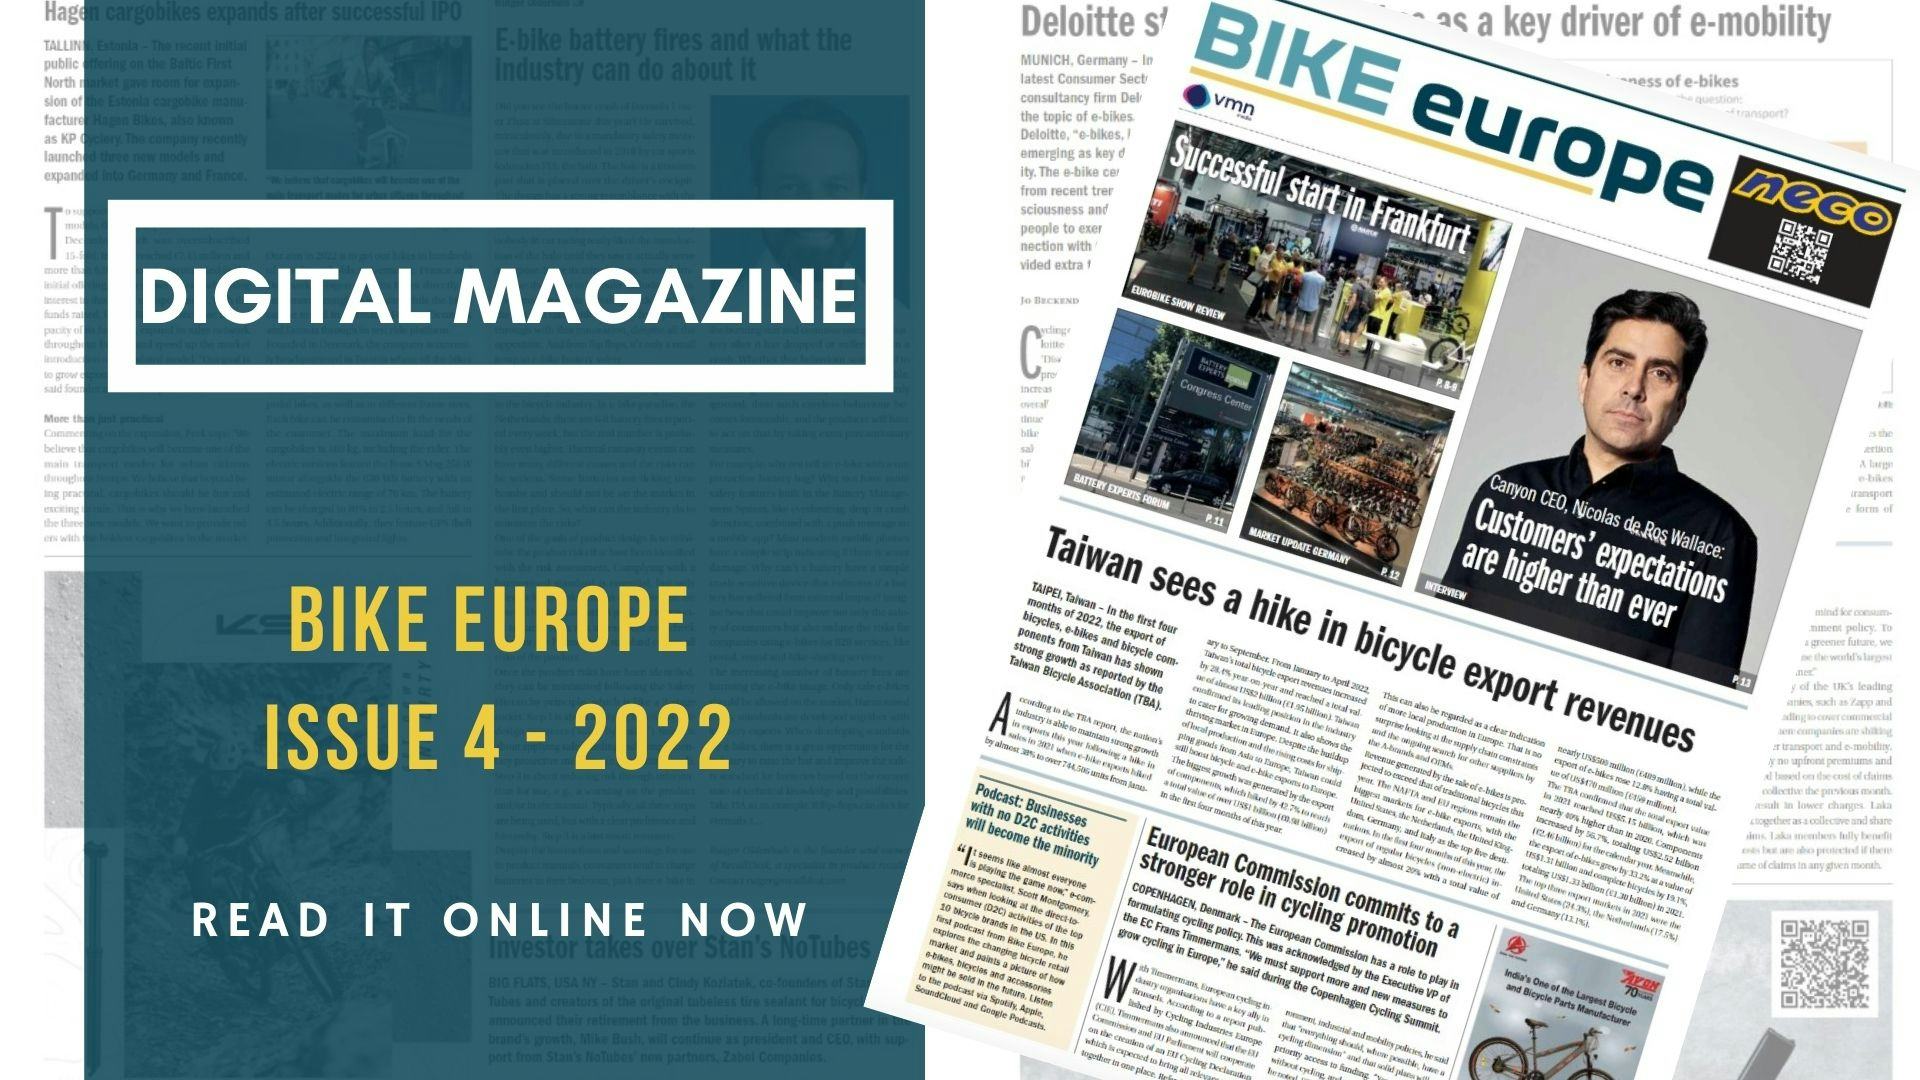 Bike Europe issue 4/2022 available online now